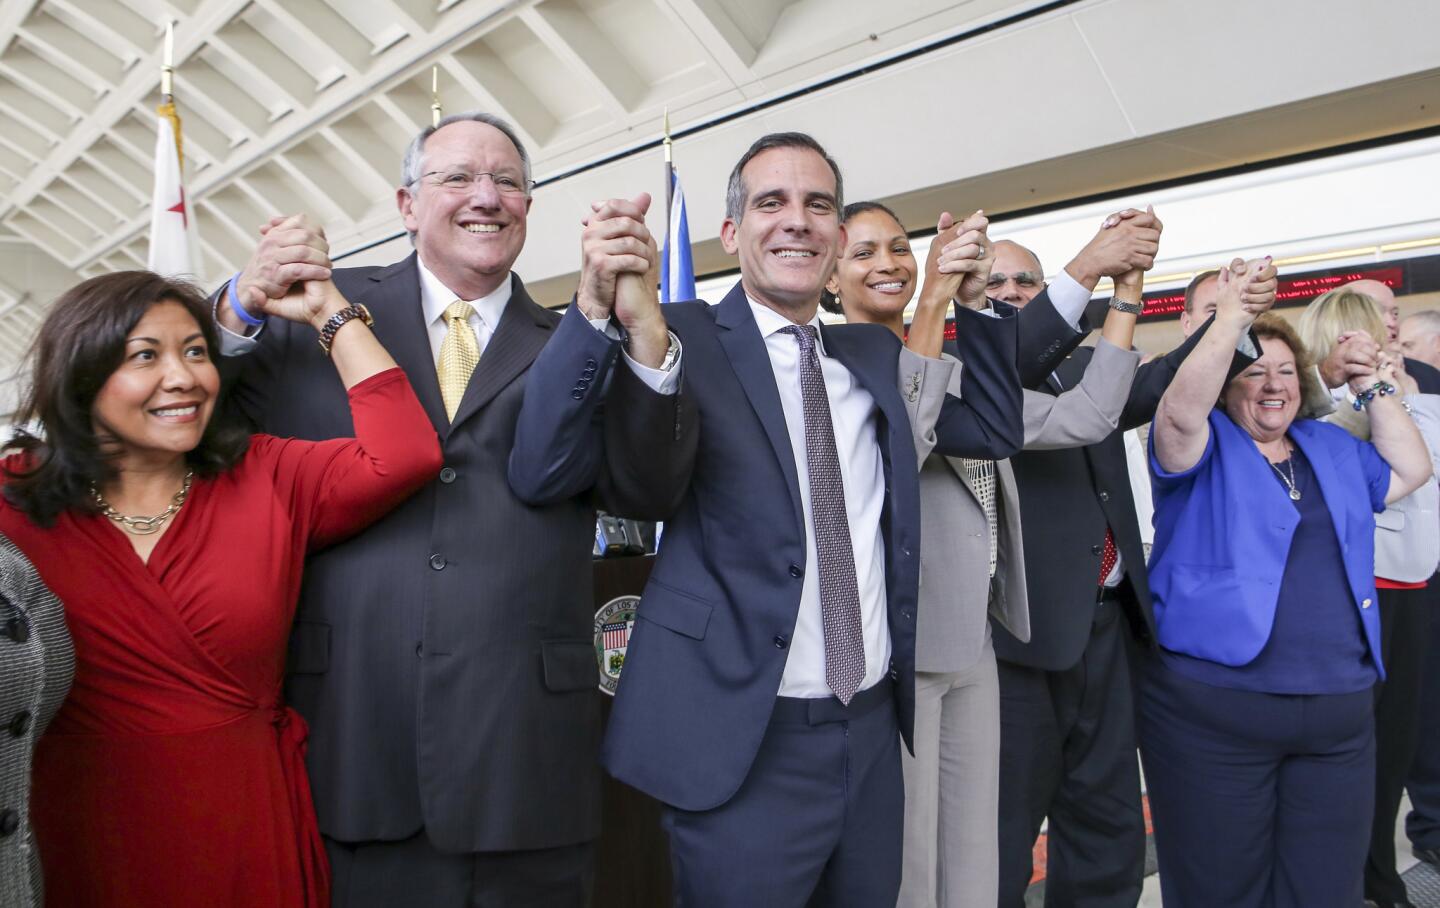 Ontario Mayor Pro Tem Alan D. Wapner, second from left, and Los Angeles Mayor Eric Garcetti join hands to celebrate the agreement.